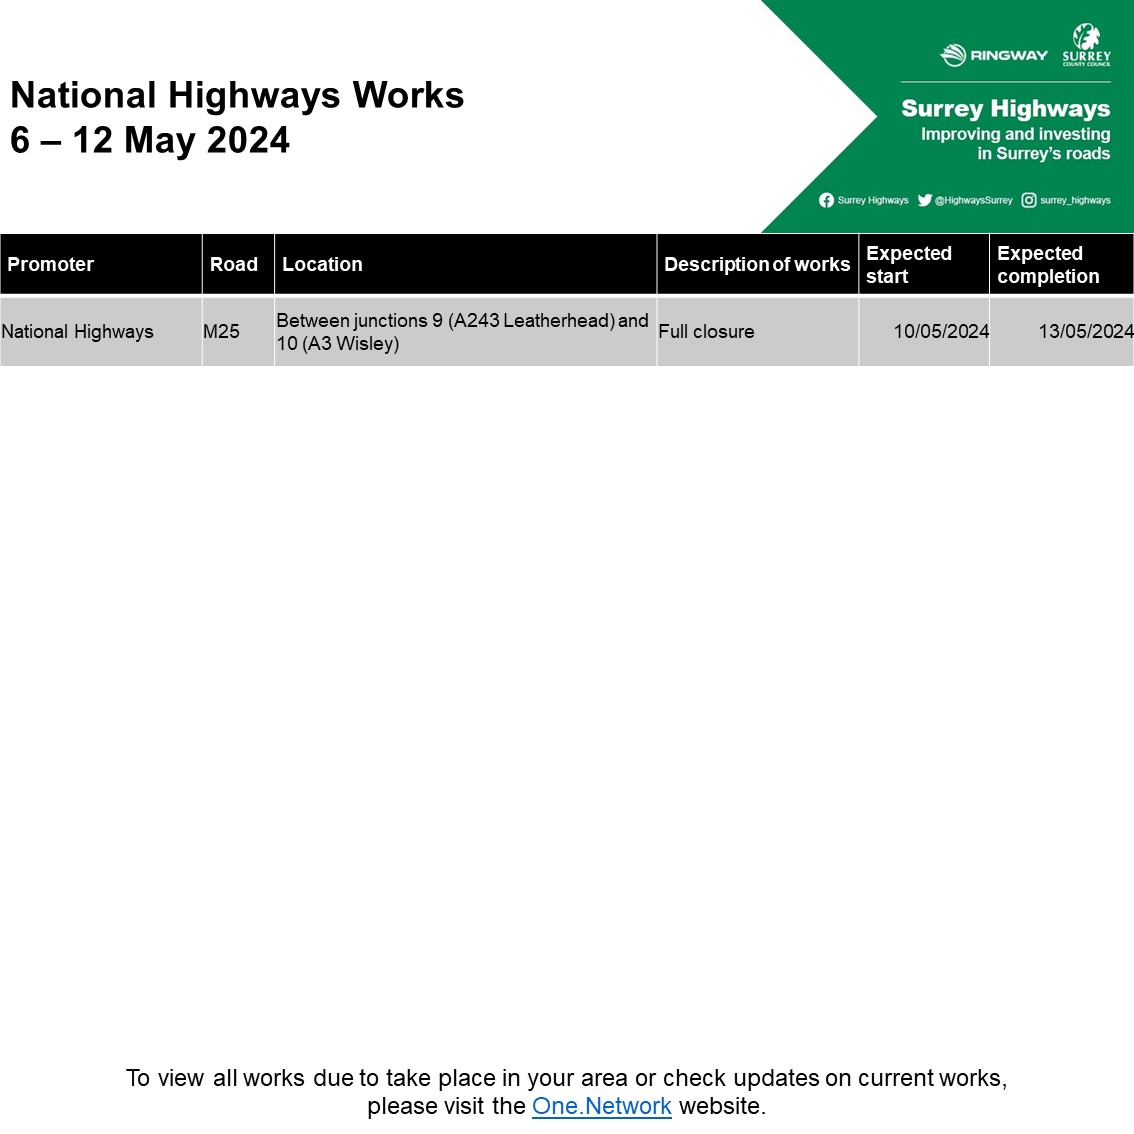 🚦Woking planned roadworks 🗓️ Week commencing 6/5/24 #Woking #Horsell #Knaphill #Sheerwater #WestByfleet #Maybury @wokingcouncil For more see orlo.uk/kXCFh Please be aware of an upcoming M25 closure (J9 and J10)